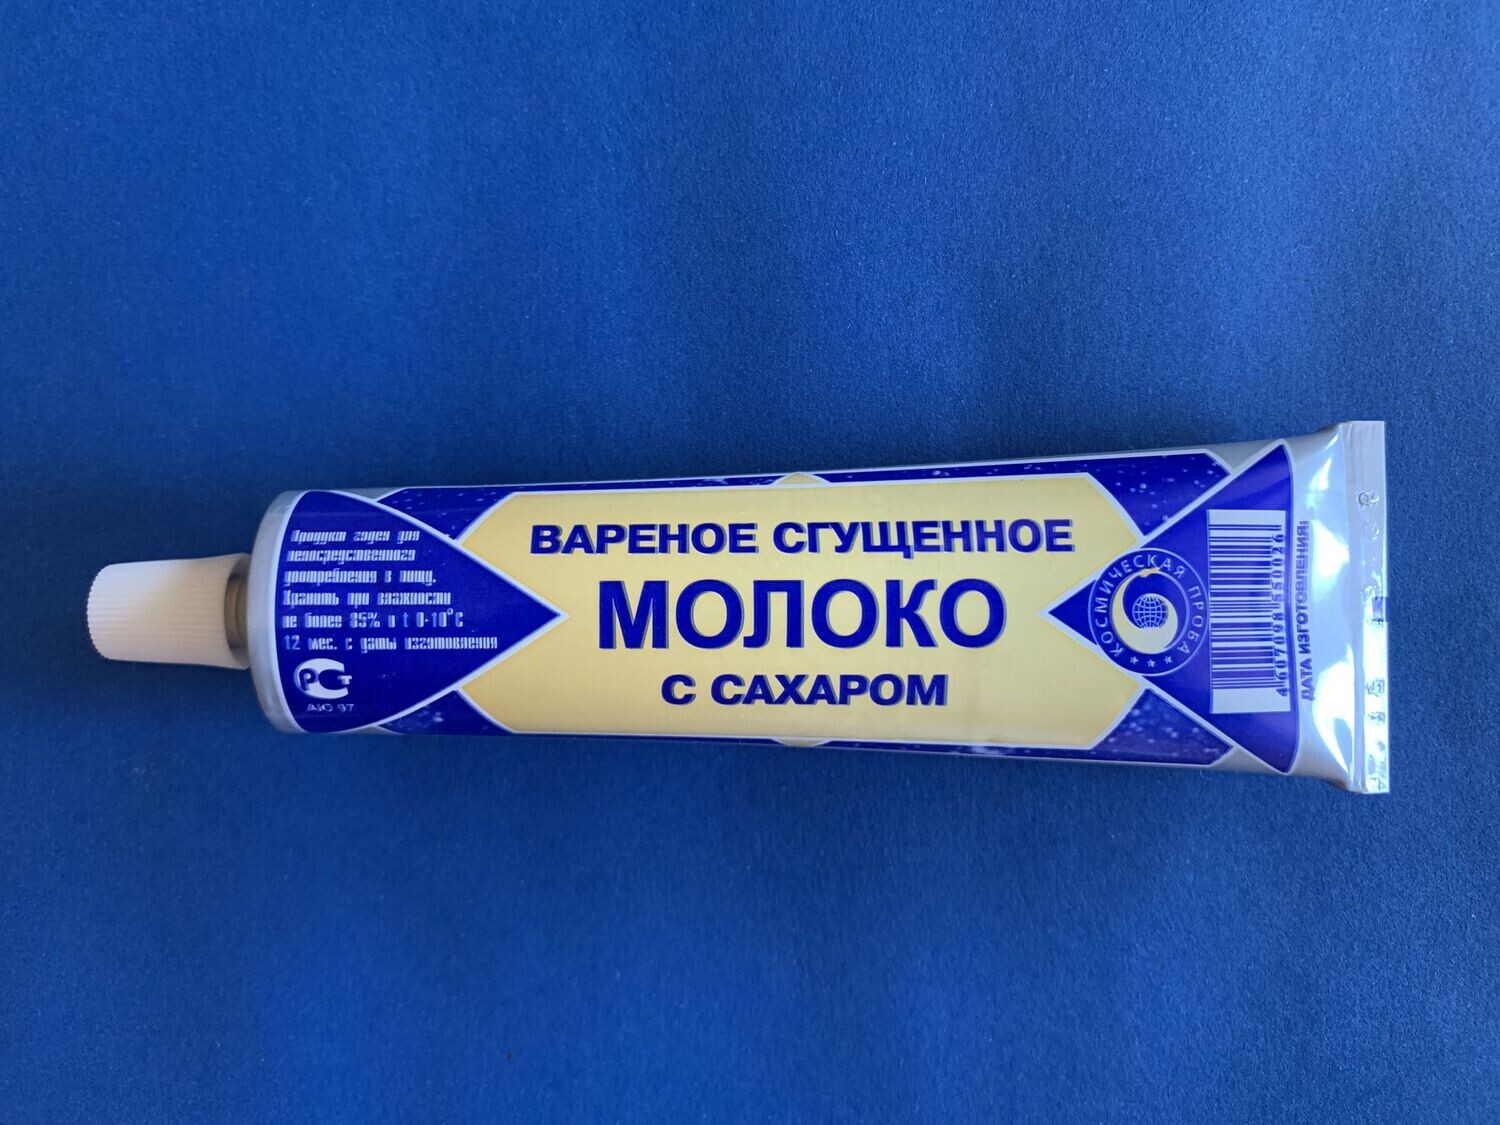 Russian cosmonaut space food: THICKENED MILK WITH SUGAR